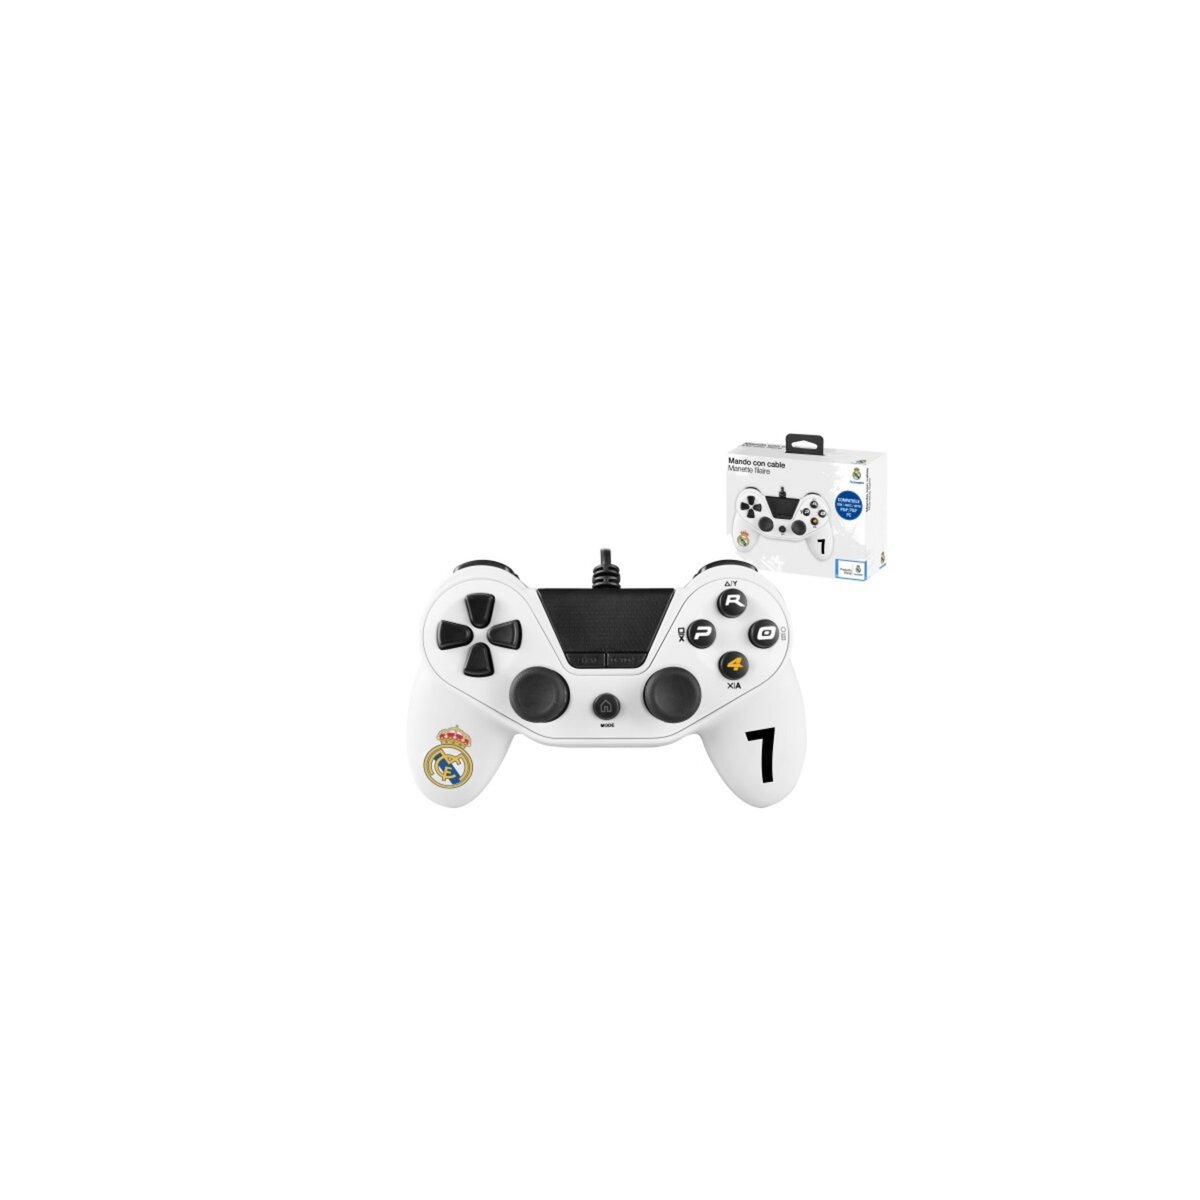 Pro4 Manette REAL  PS4 PC PS3